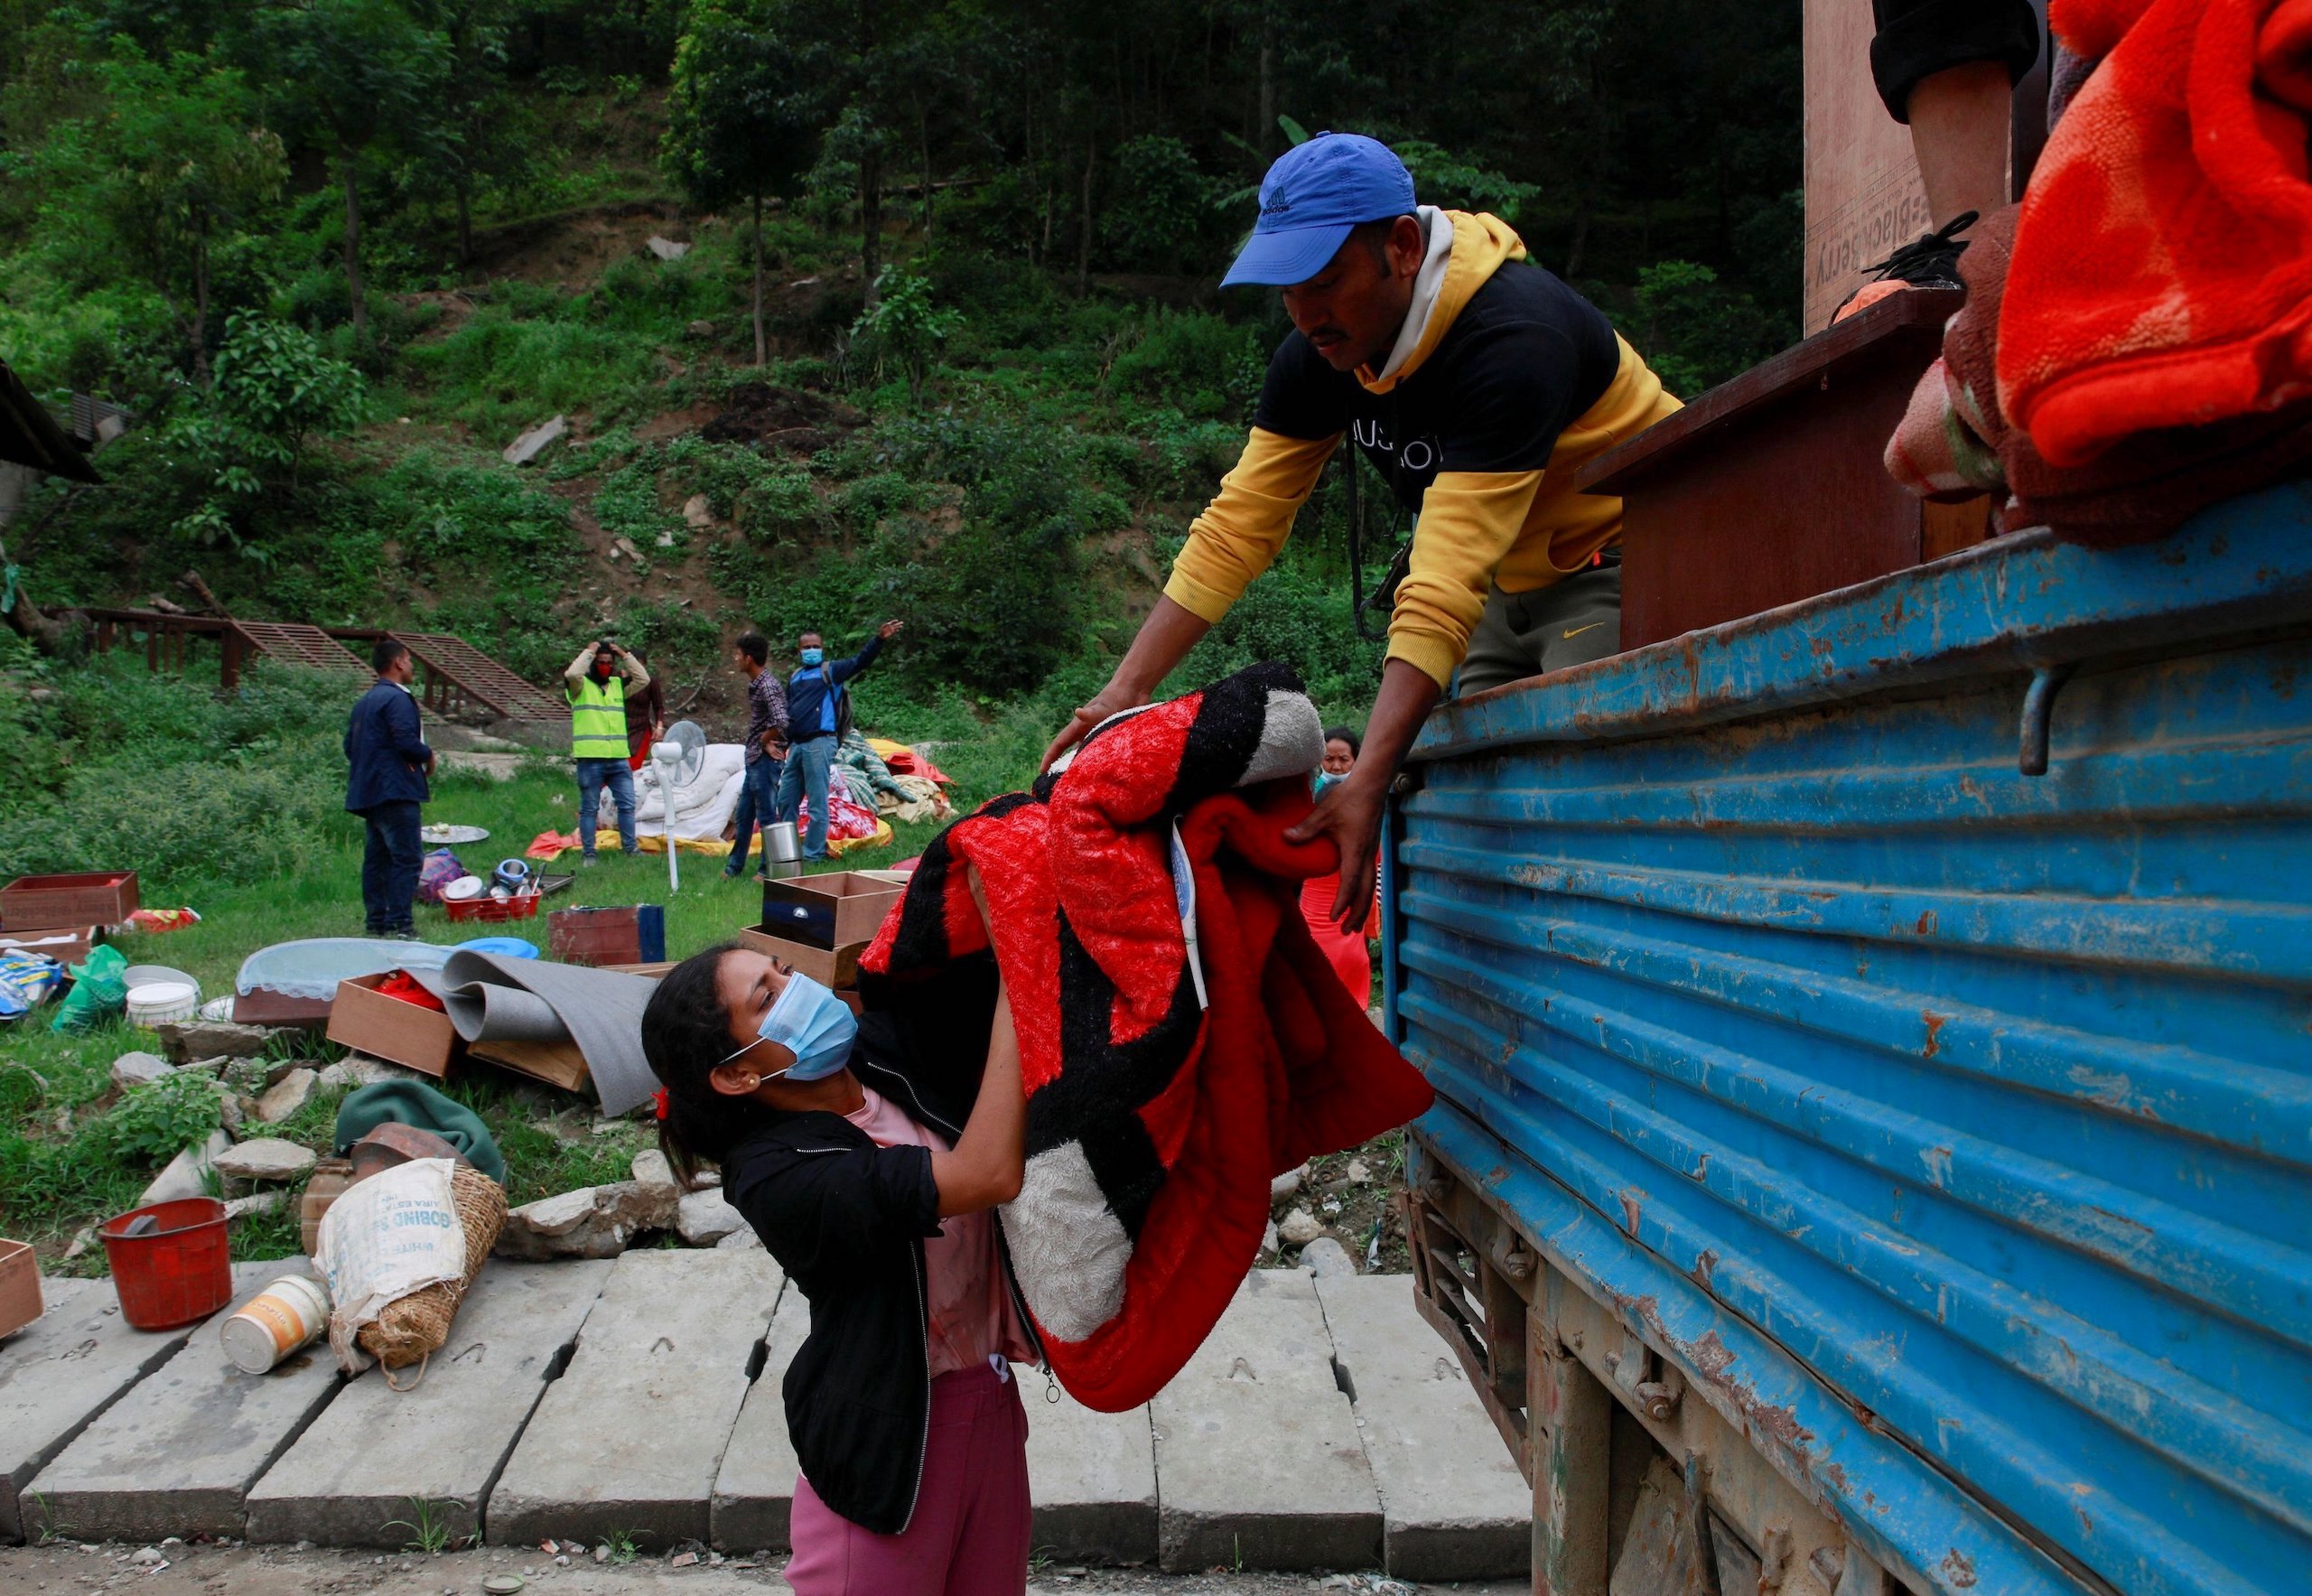 <p>Residents of Sindhupalchok, Nepal, gather their belongings as they move towards higher ground, away from floods that hit the area in June 2021. Nepal’s preparedness for climate disasters like this is being hampered by confusion over which part of government &#8211; central, regional or local &#8211; has responsibility for policies to mitigate and adapt to global warming. (Image: Navesh Chitrakar / Alamy)</p>